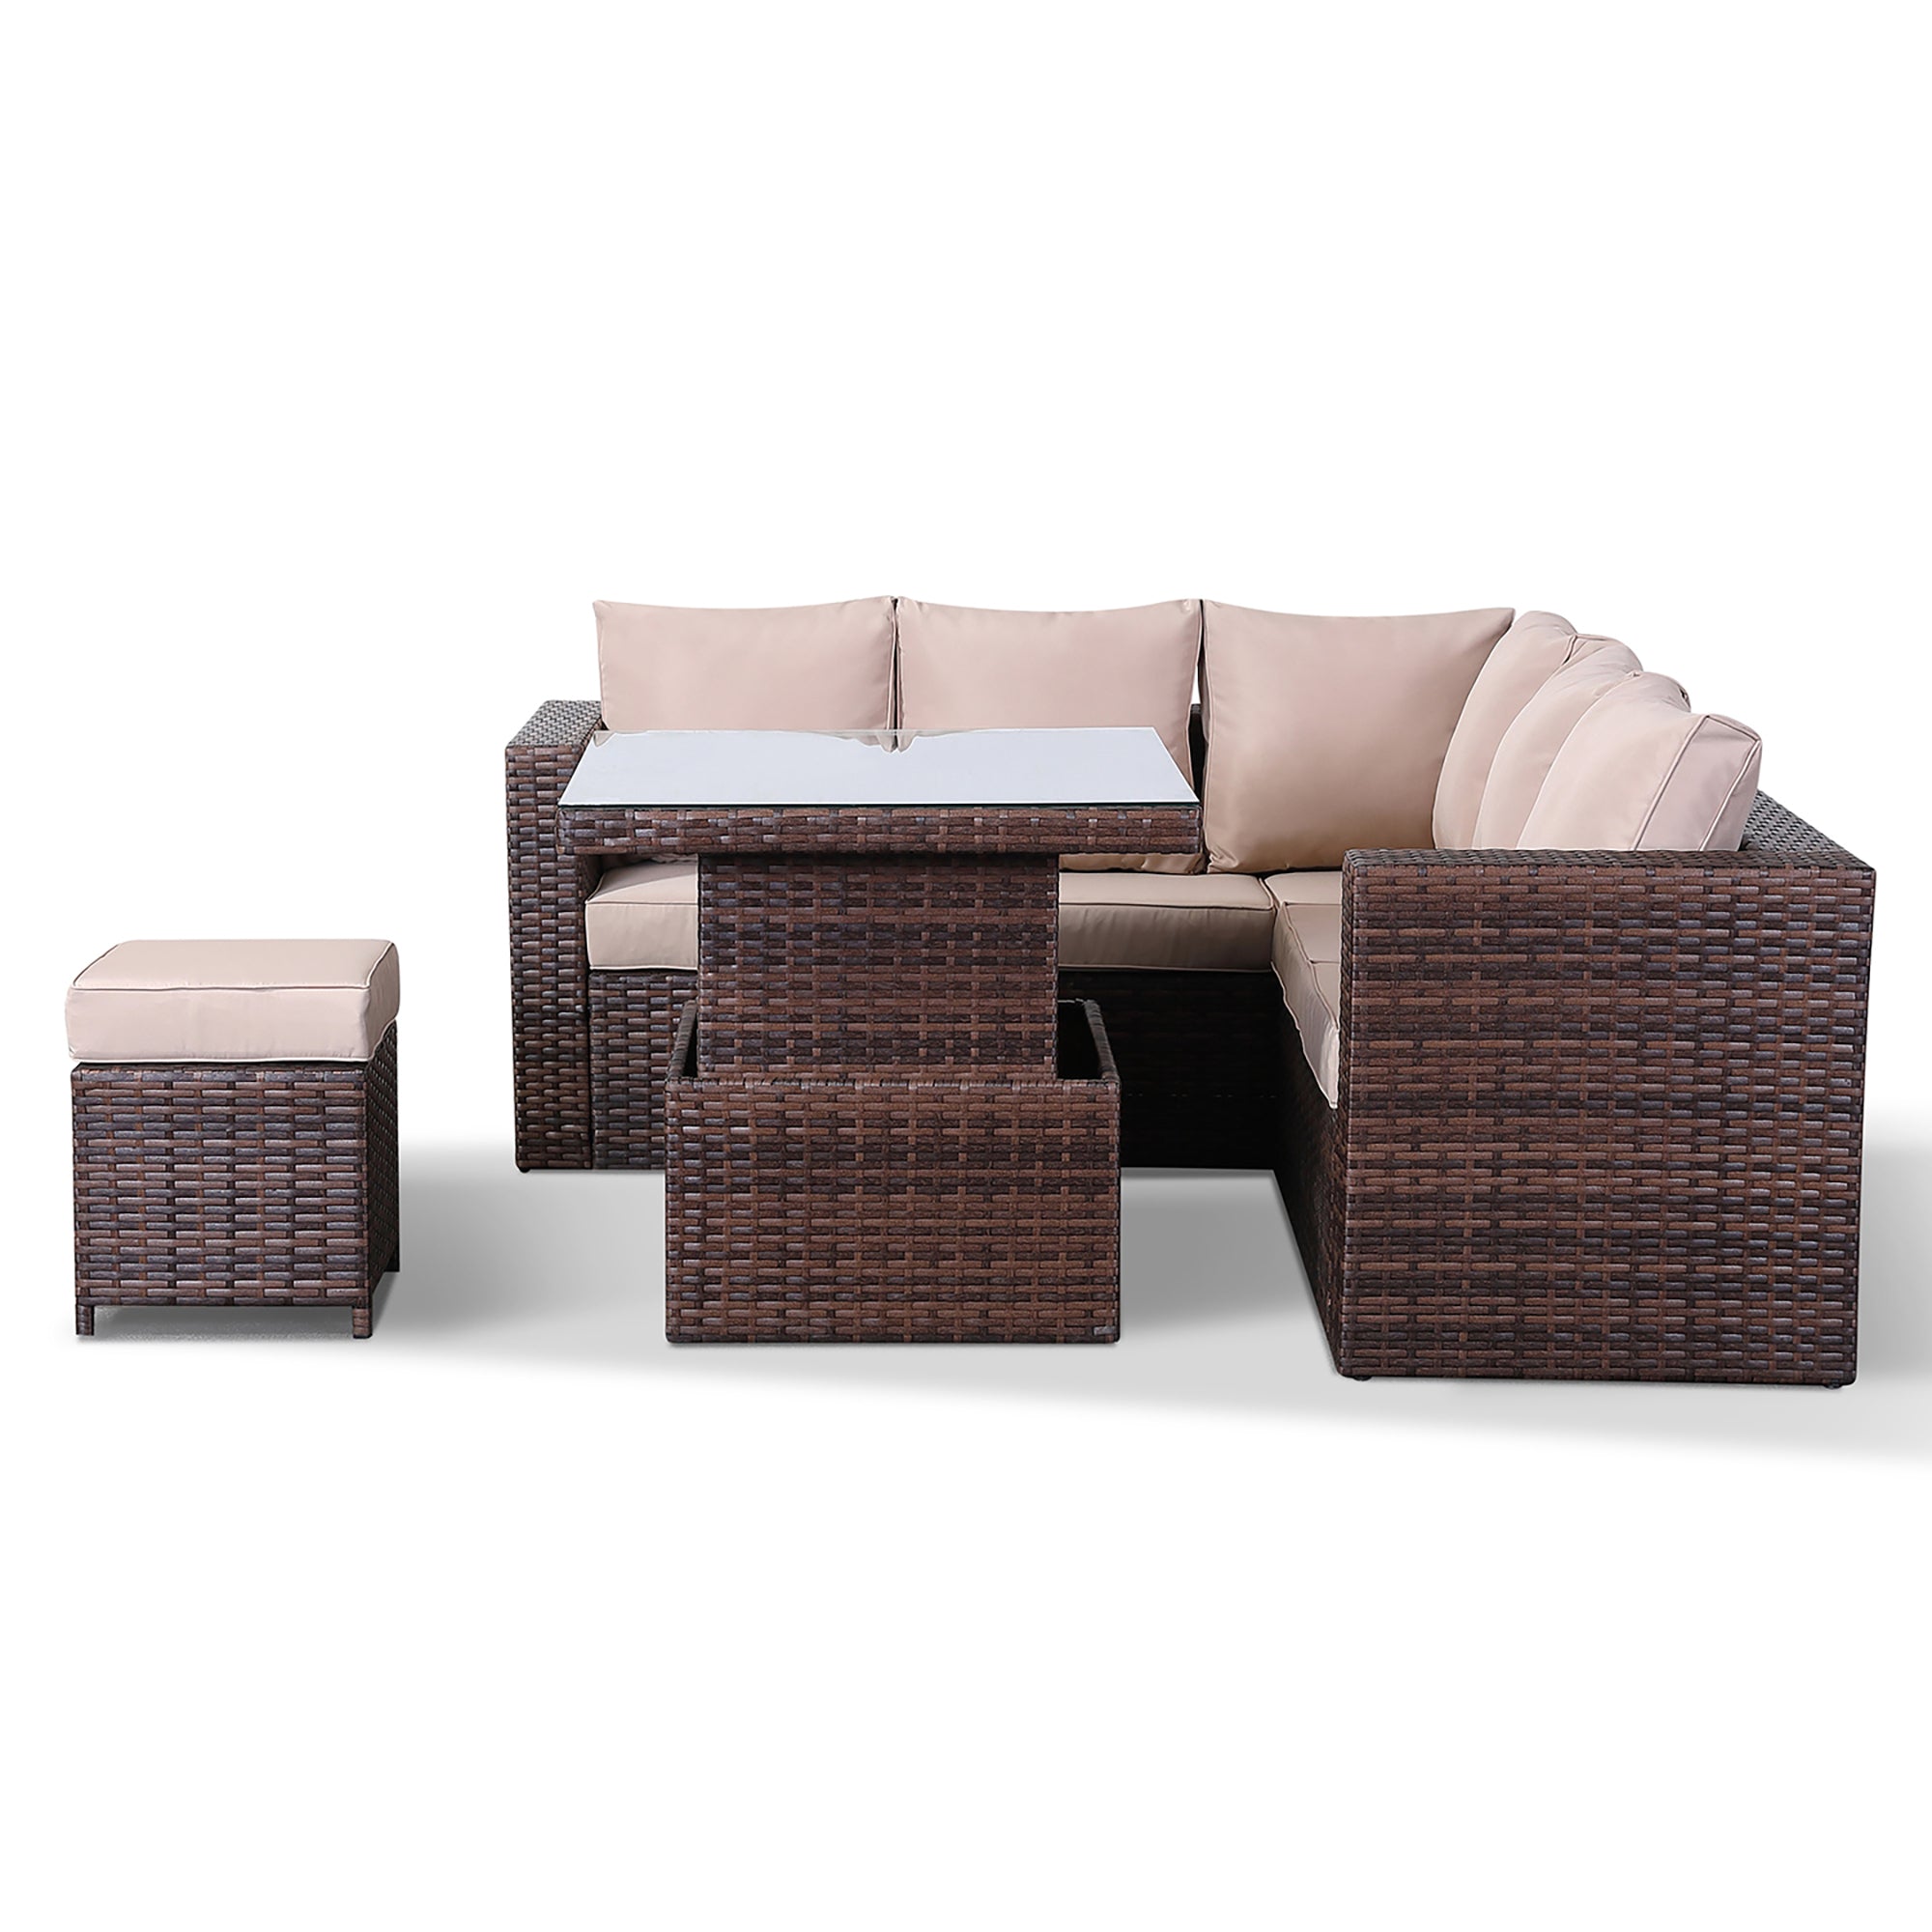 F2..Lily Range SELF ASSEMBLY Small Dining Corner Sofa Set with Rising Table In Brown